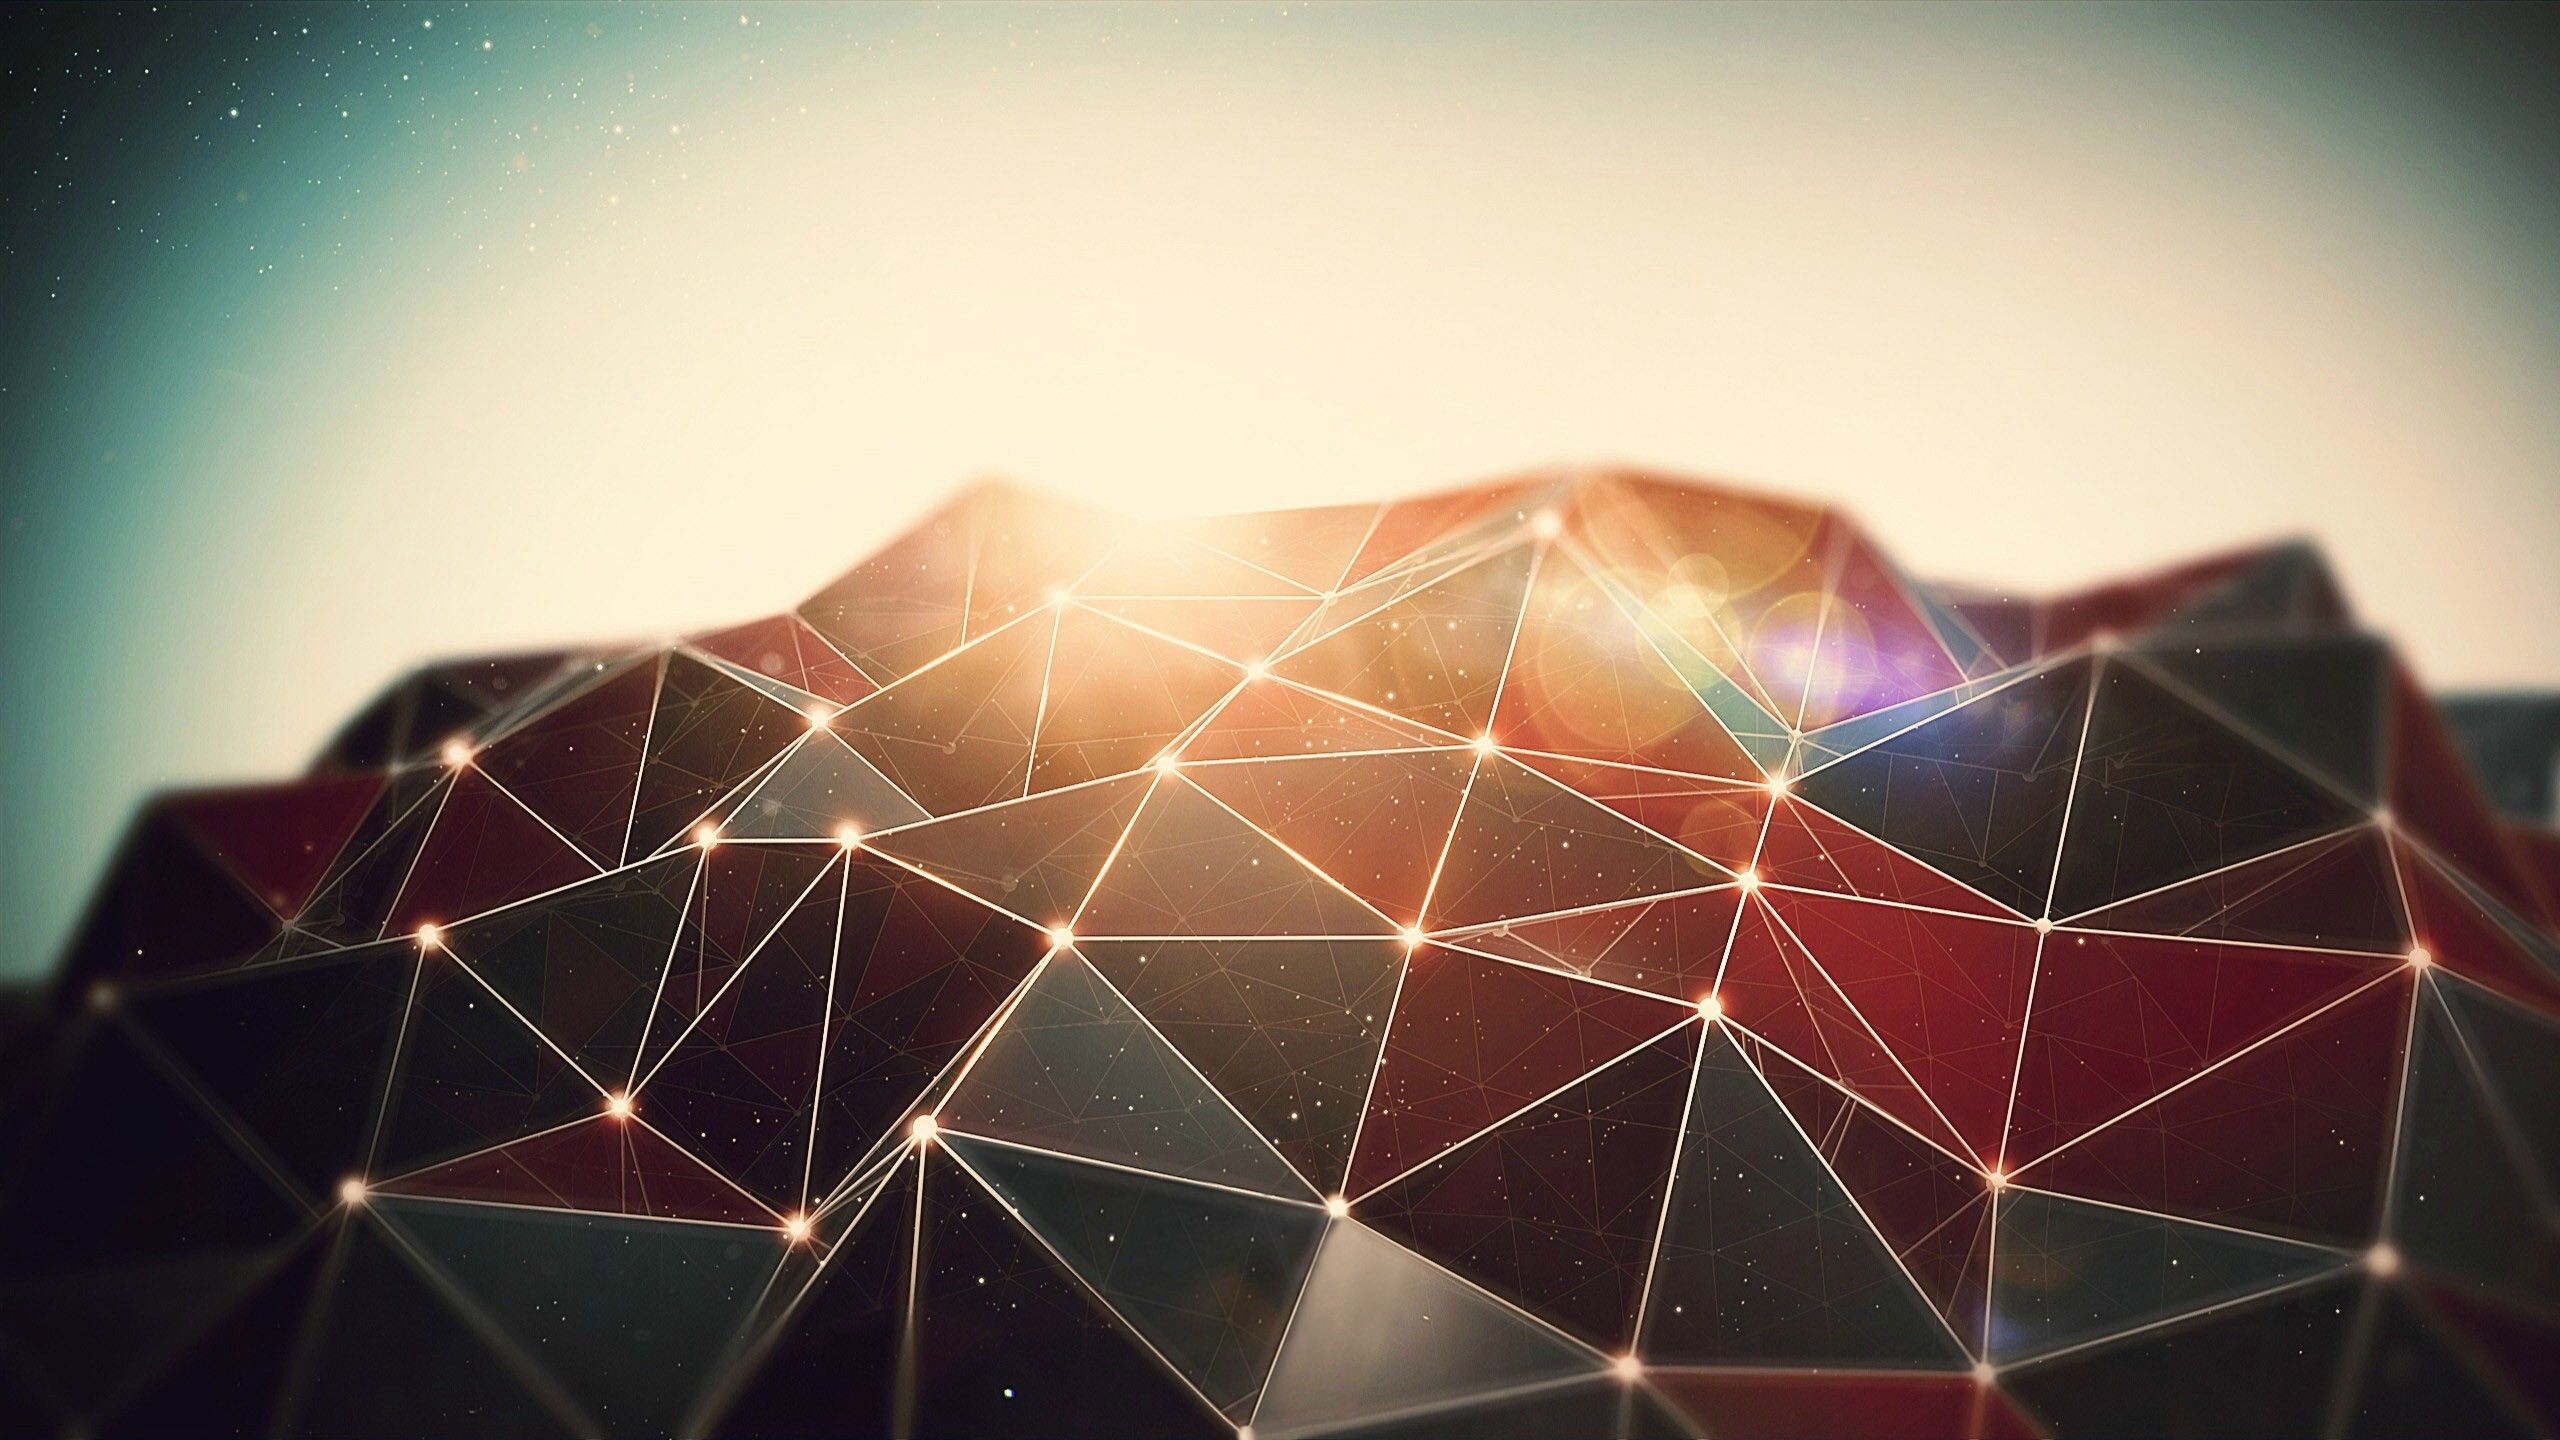 Geometric Abstract: Polygon art, Lines segments, Triangles, Right angles. 2560x1440 HD Wallpaper.